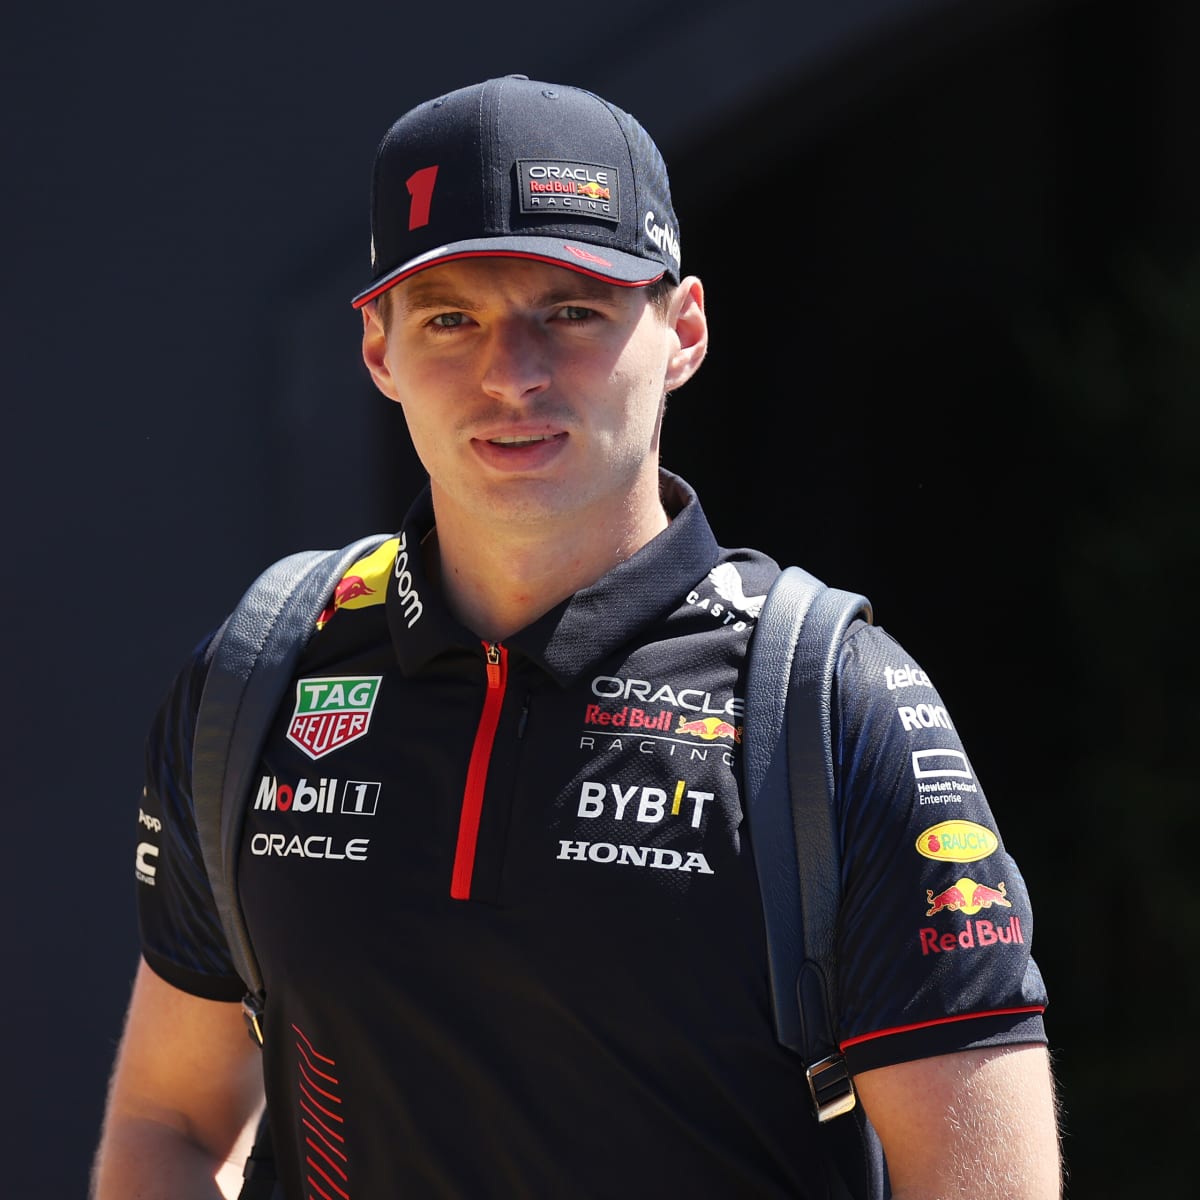 paddestoel Knikken een beetje F1 News: Max Verstappen Lashes Out At George Russell After Contact - F1  Briefings: Formula 1 News, Rumors, Standings and More